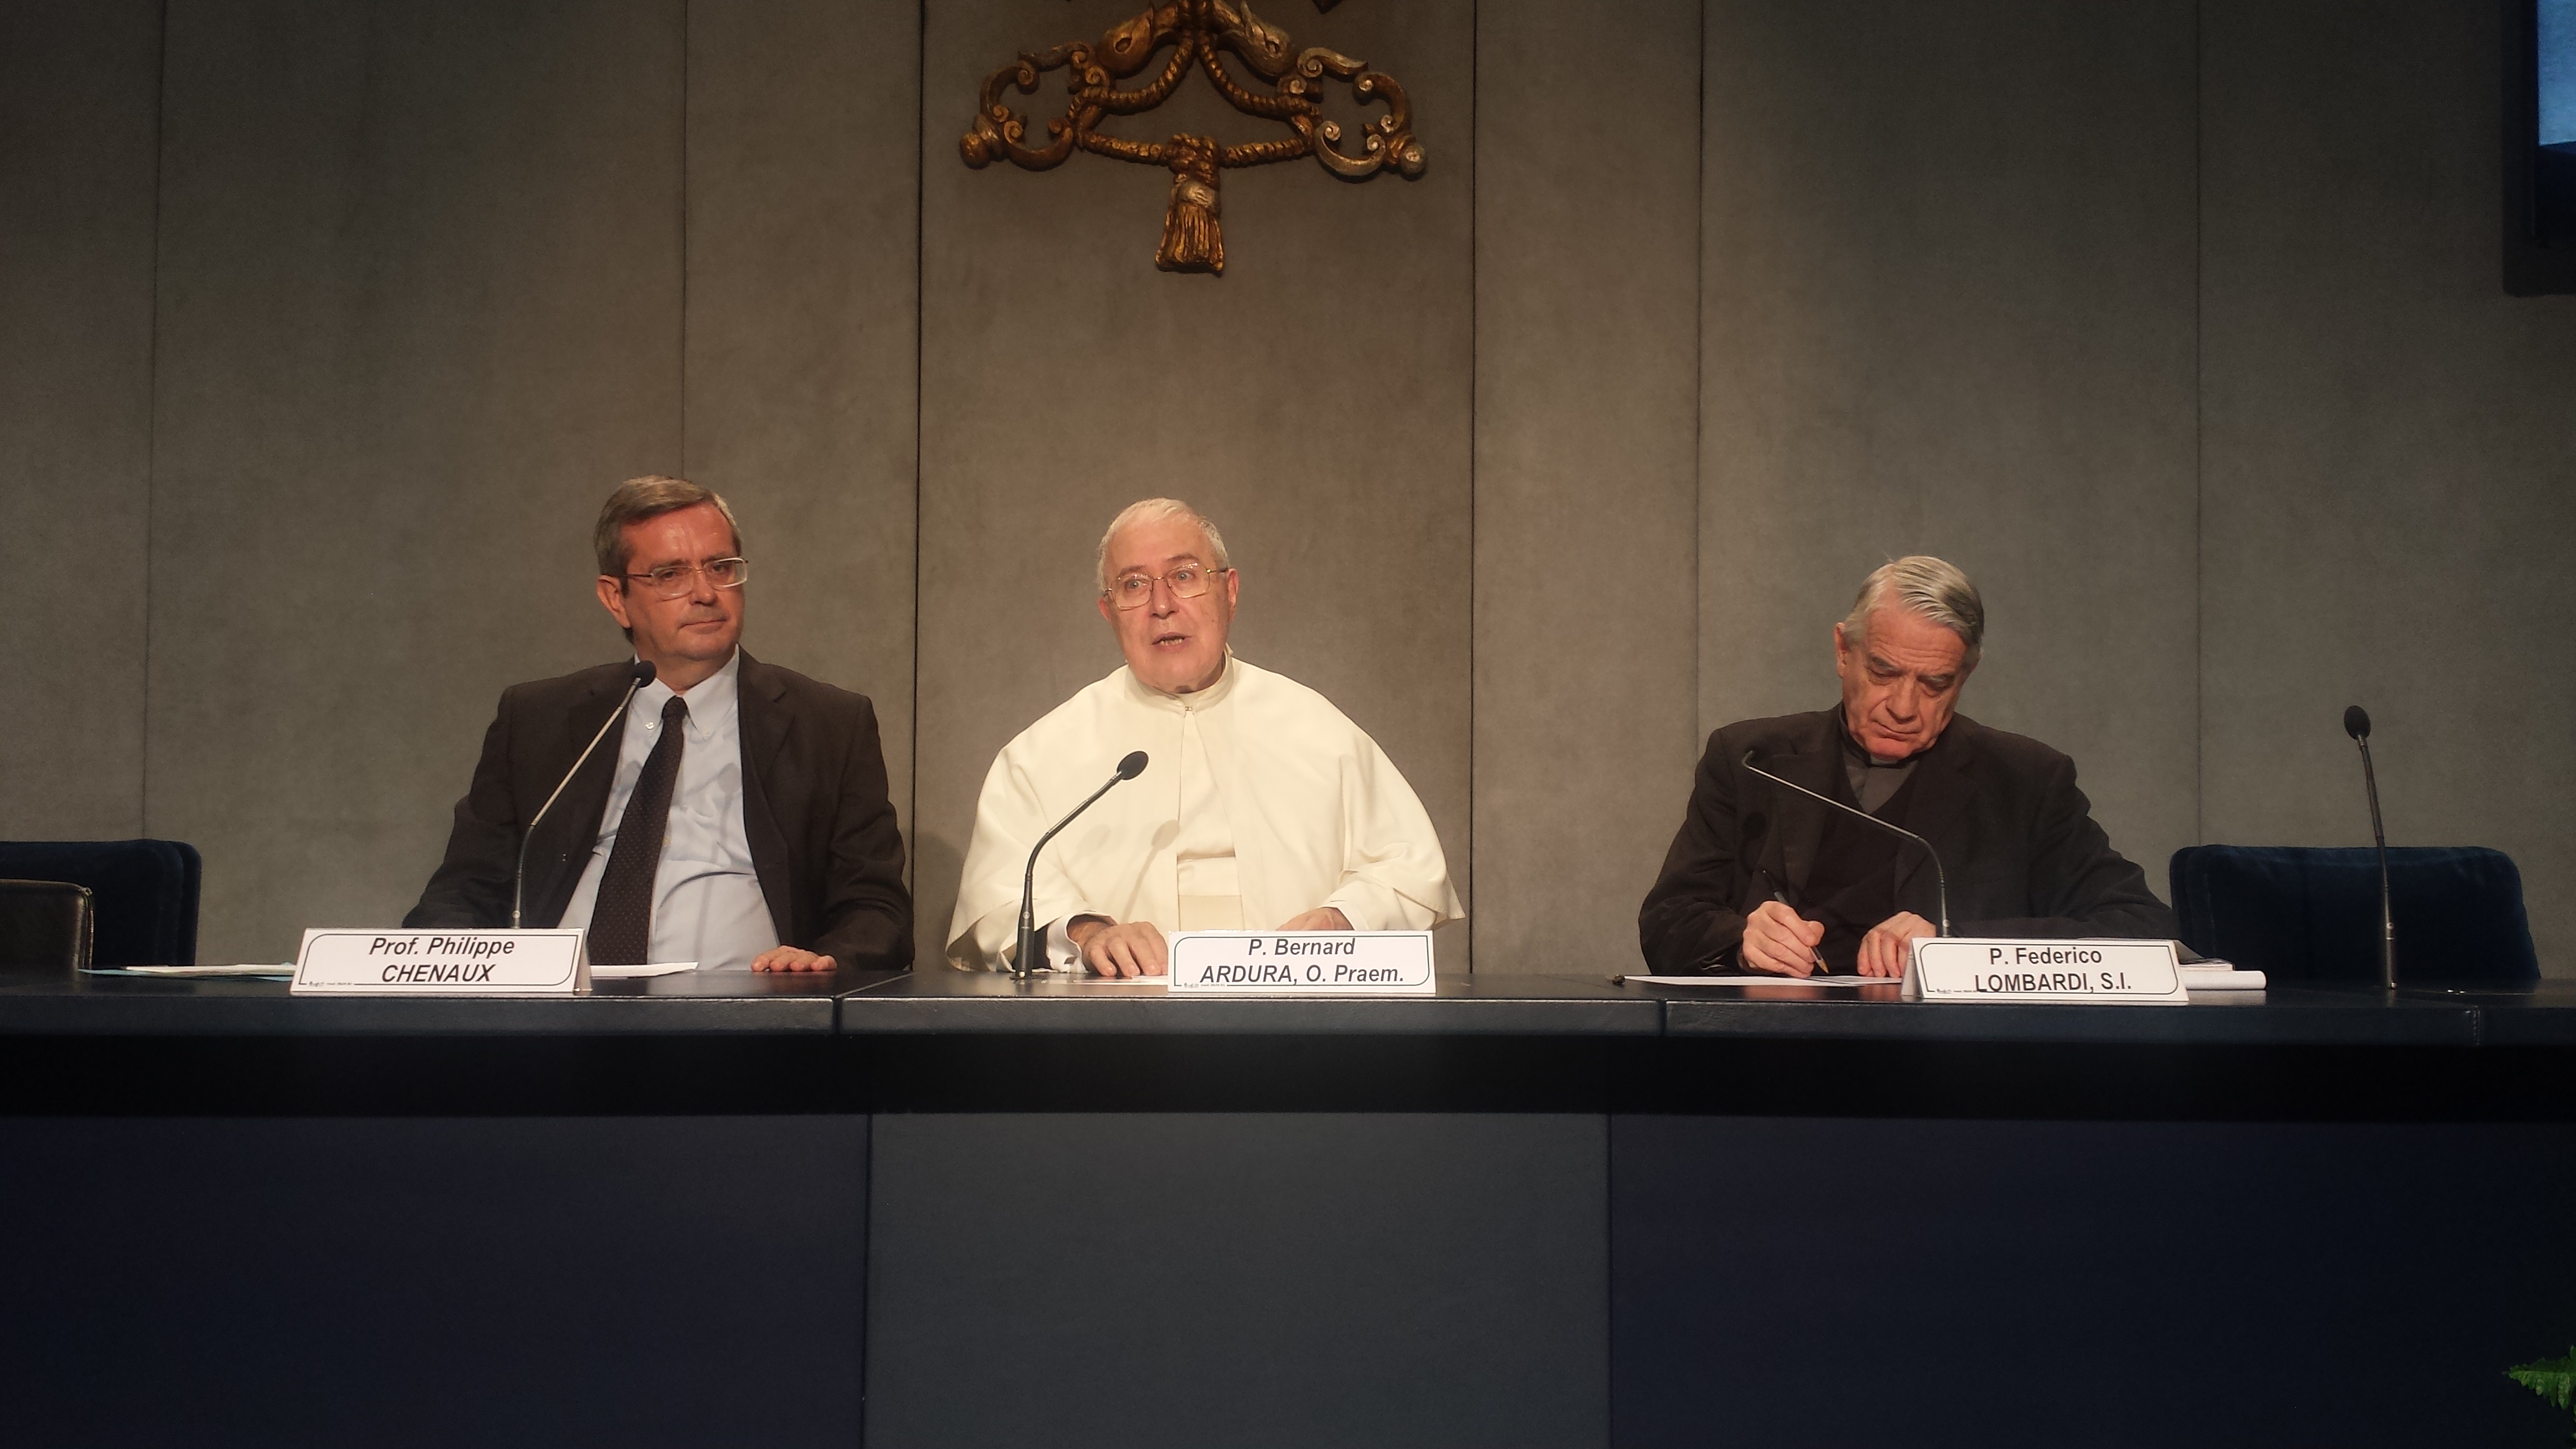 Press conference about Vatican II congress